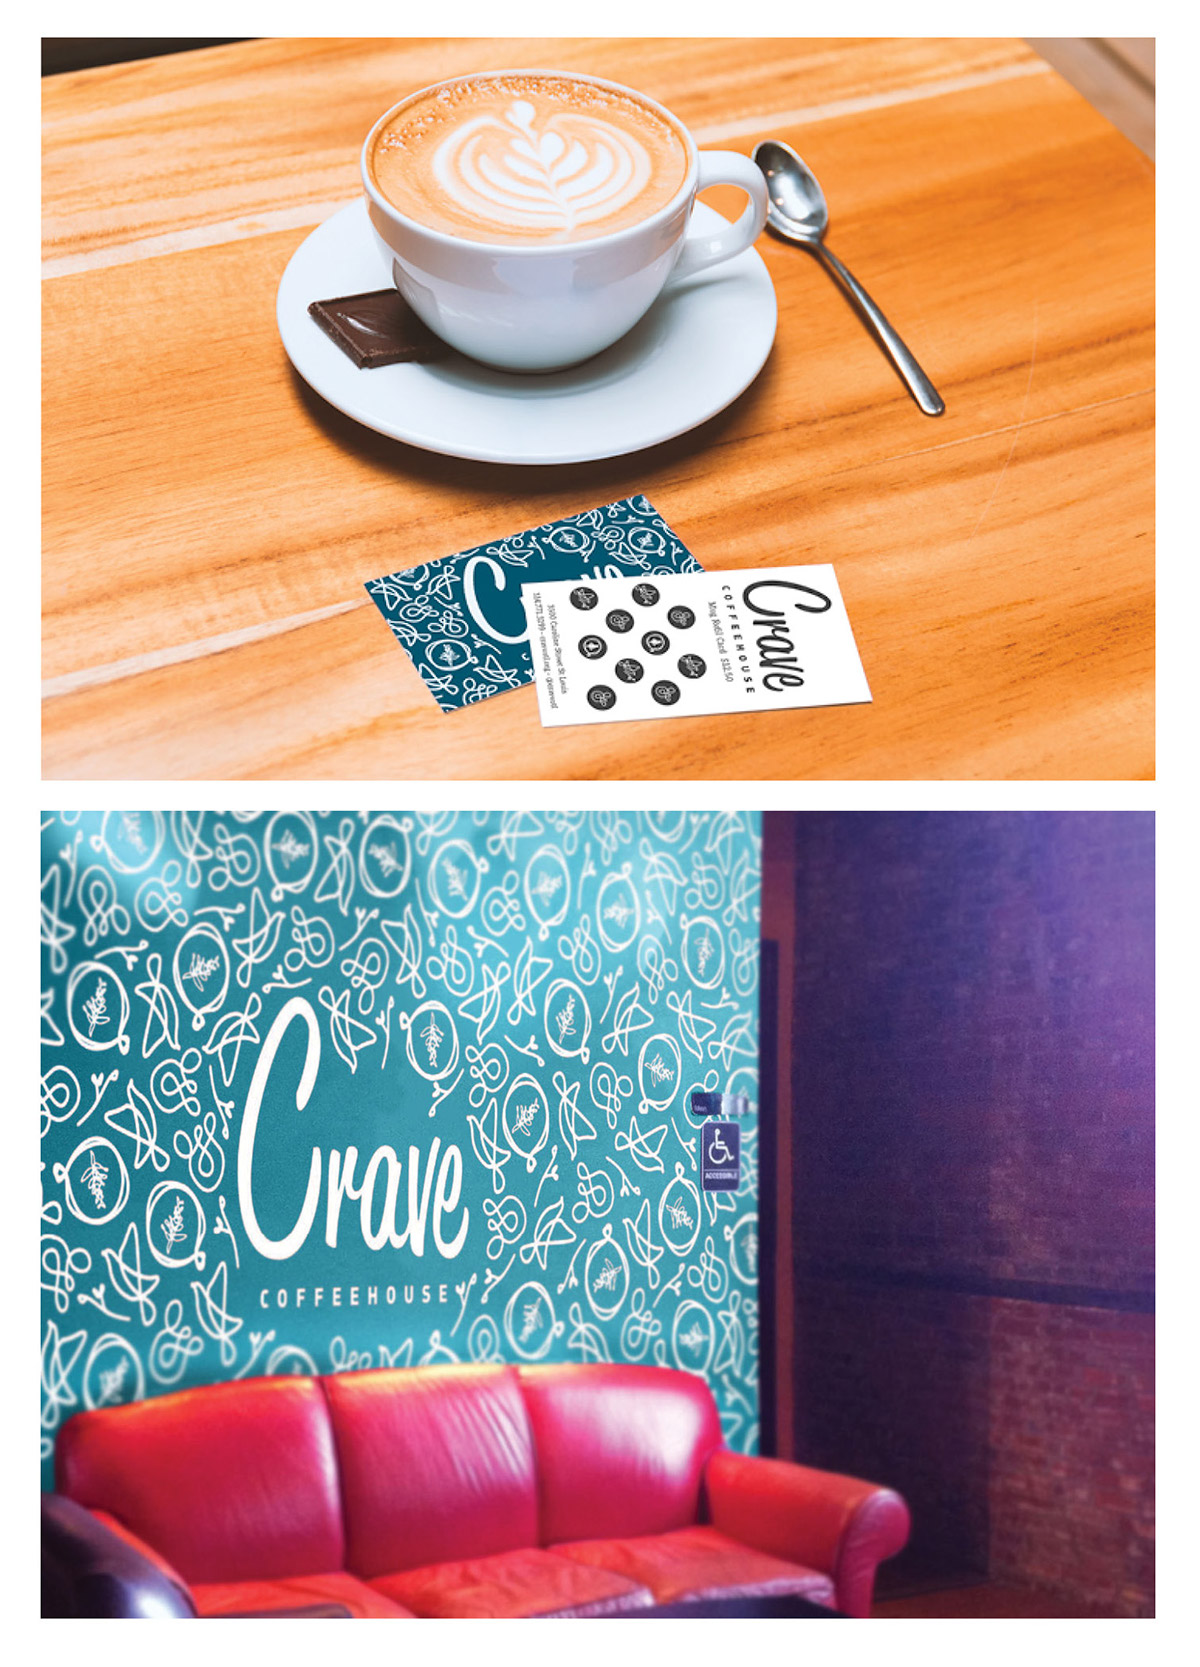 pattern coffeehouse cafe crave peace Coffee more re-branding